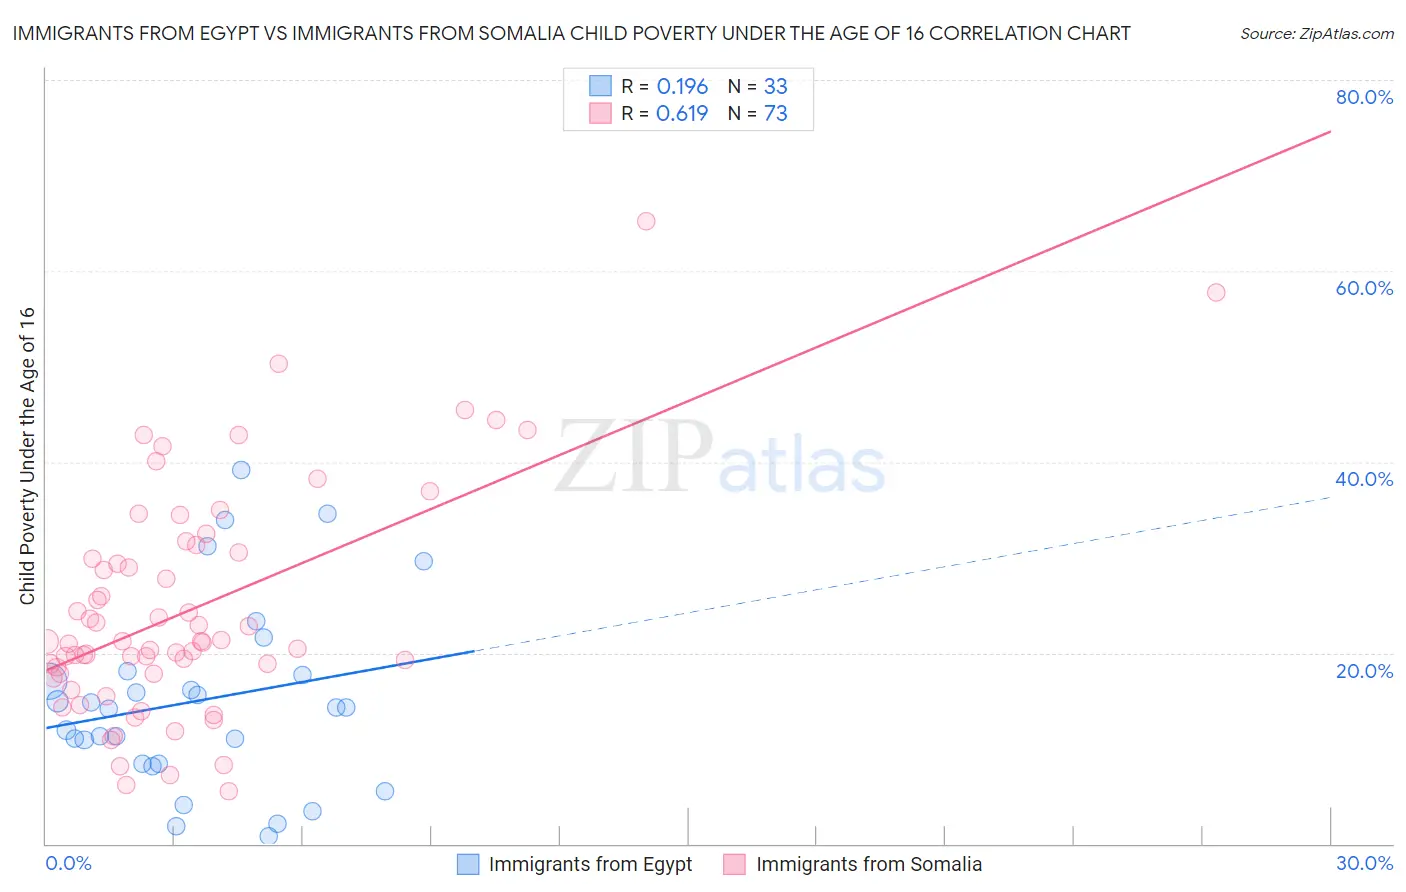 Immigrants from Egypt vs Immigrants from Somalia Child Poverty Under the Age of 16